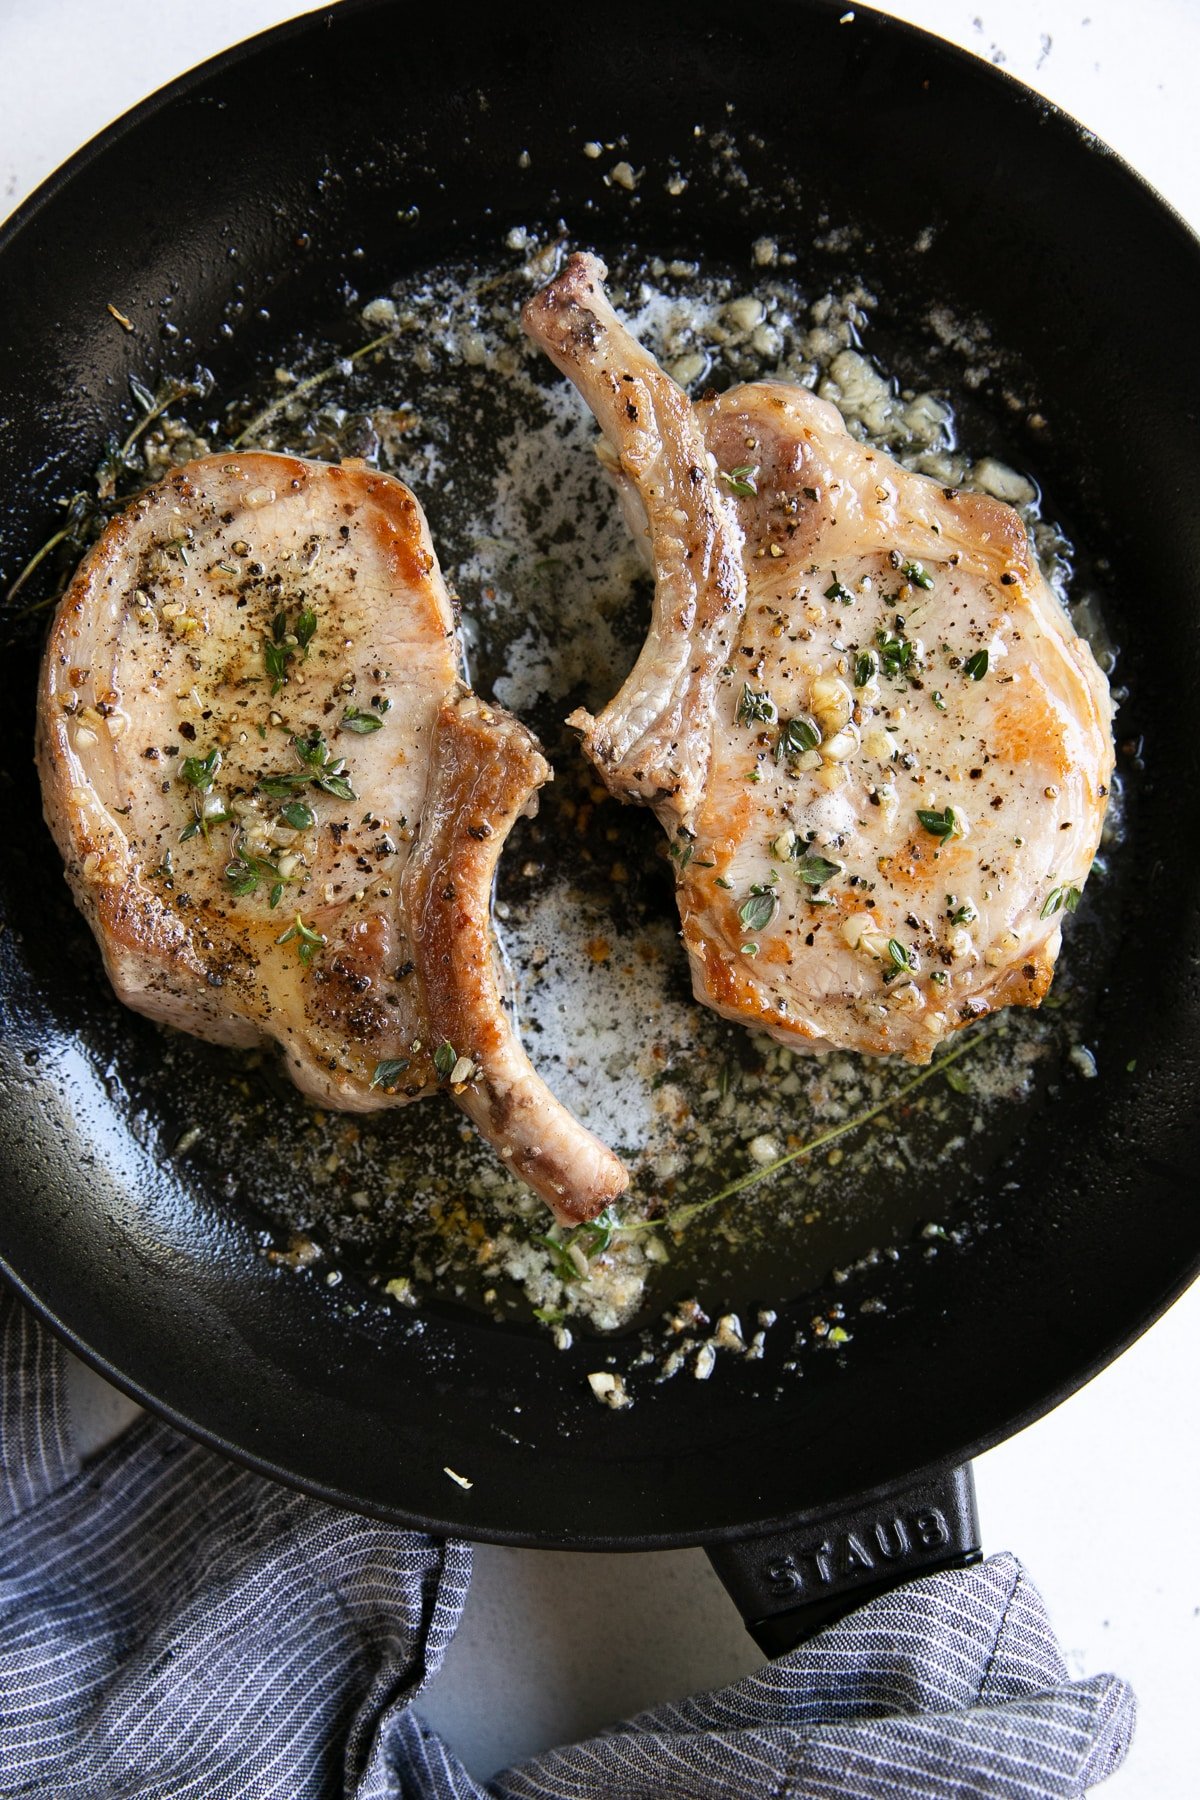 Garlic Butter Pork Chop Recipe (Ready in Just 15 Minutes!) - The Forked ...